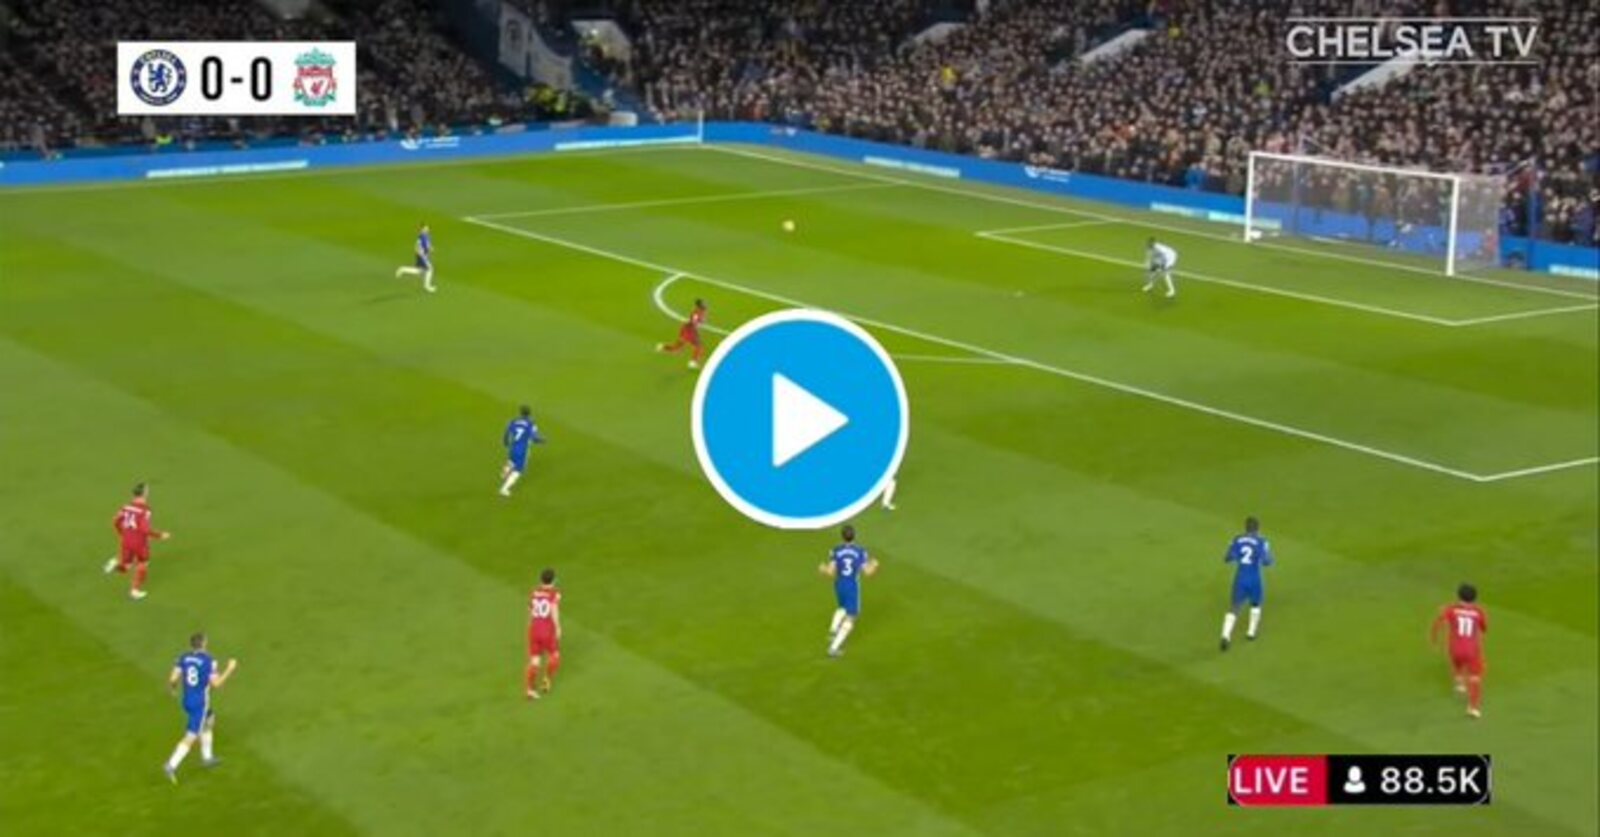 #CHELIV Live: Watch Chelsea vs Liverpool Livestream Here